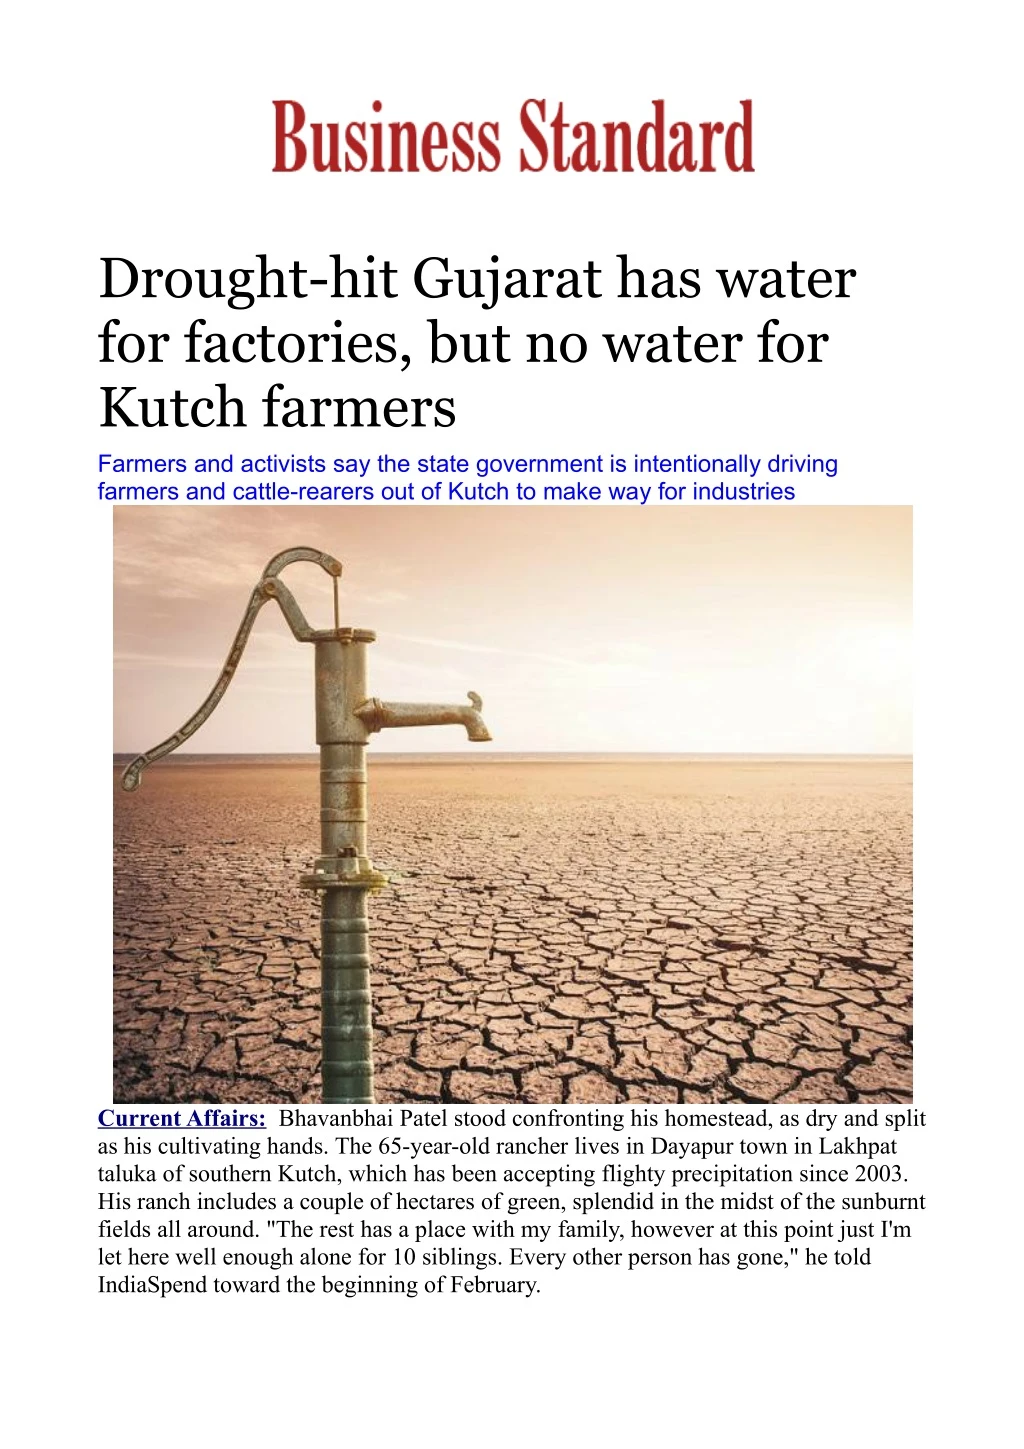 drought hit gujarat has water for factories